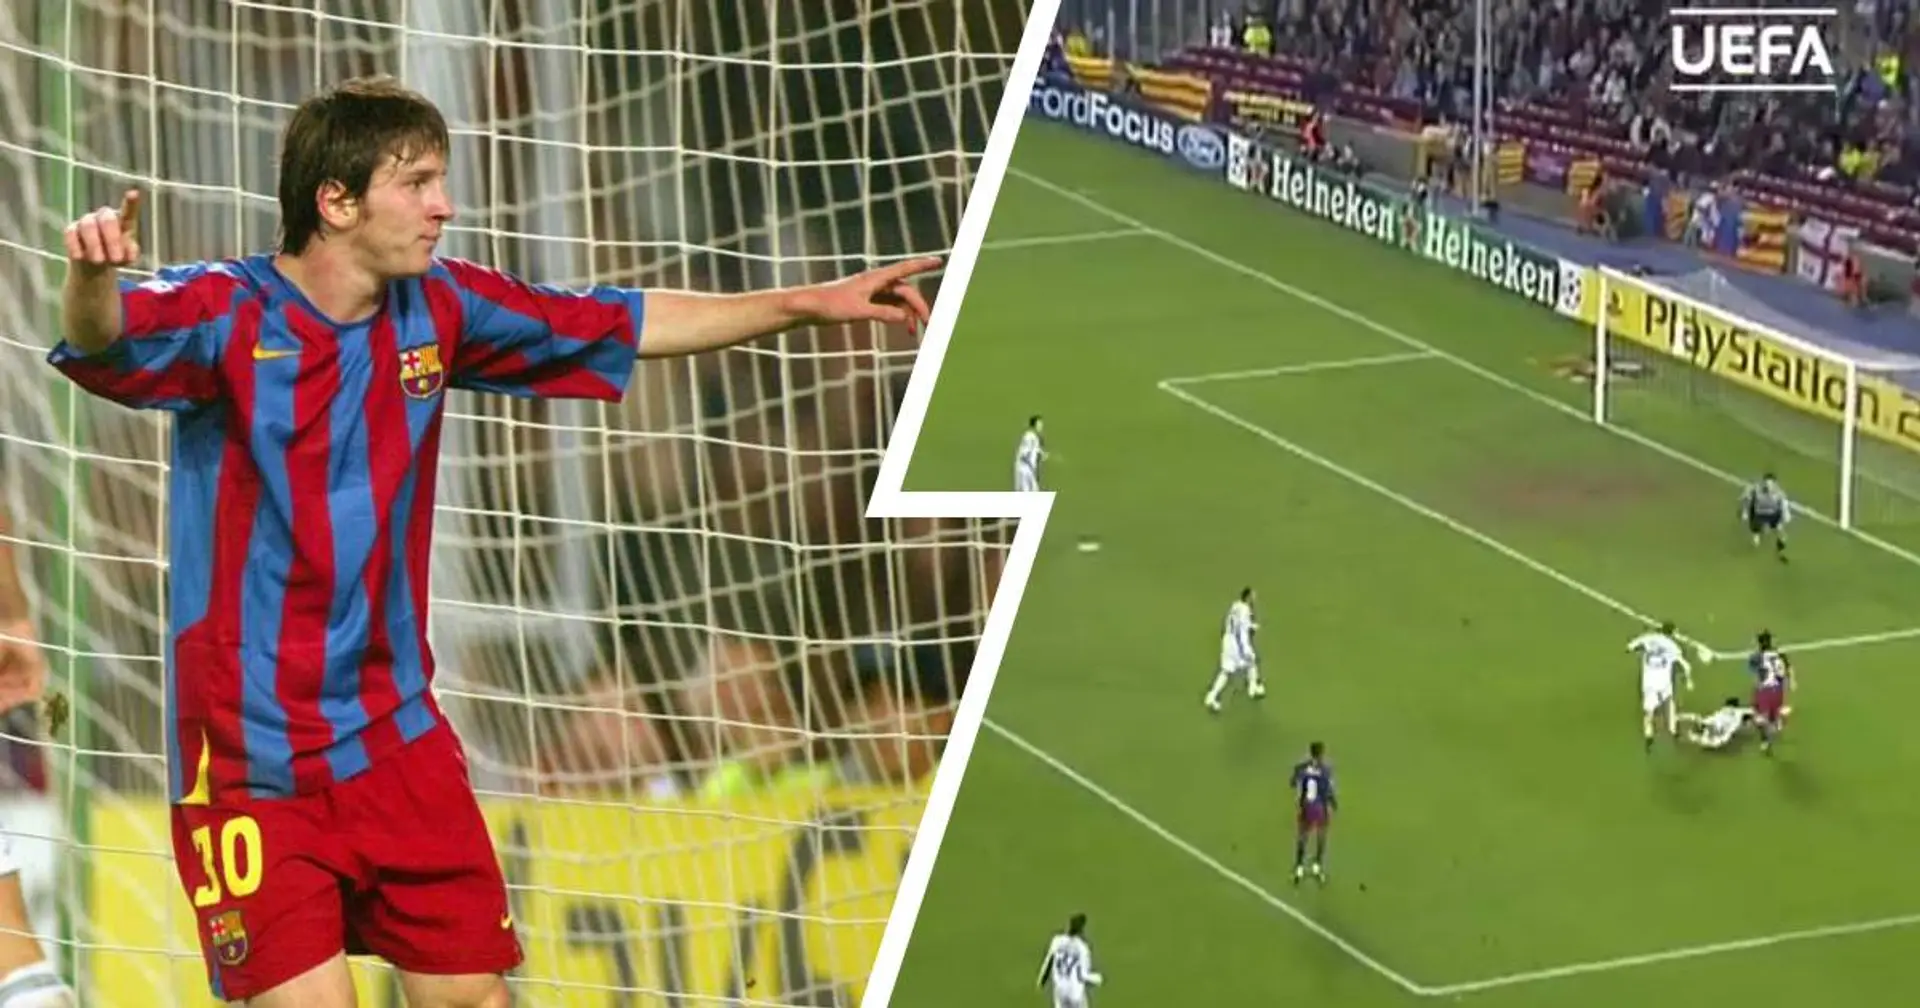 Grounding defenders right from the start: Messi scored his debut Champions League goal exactly 15 years ago (video)